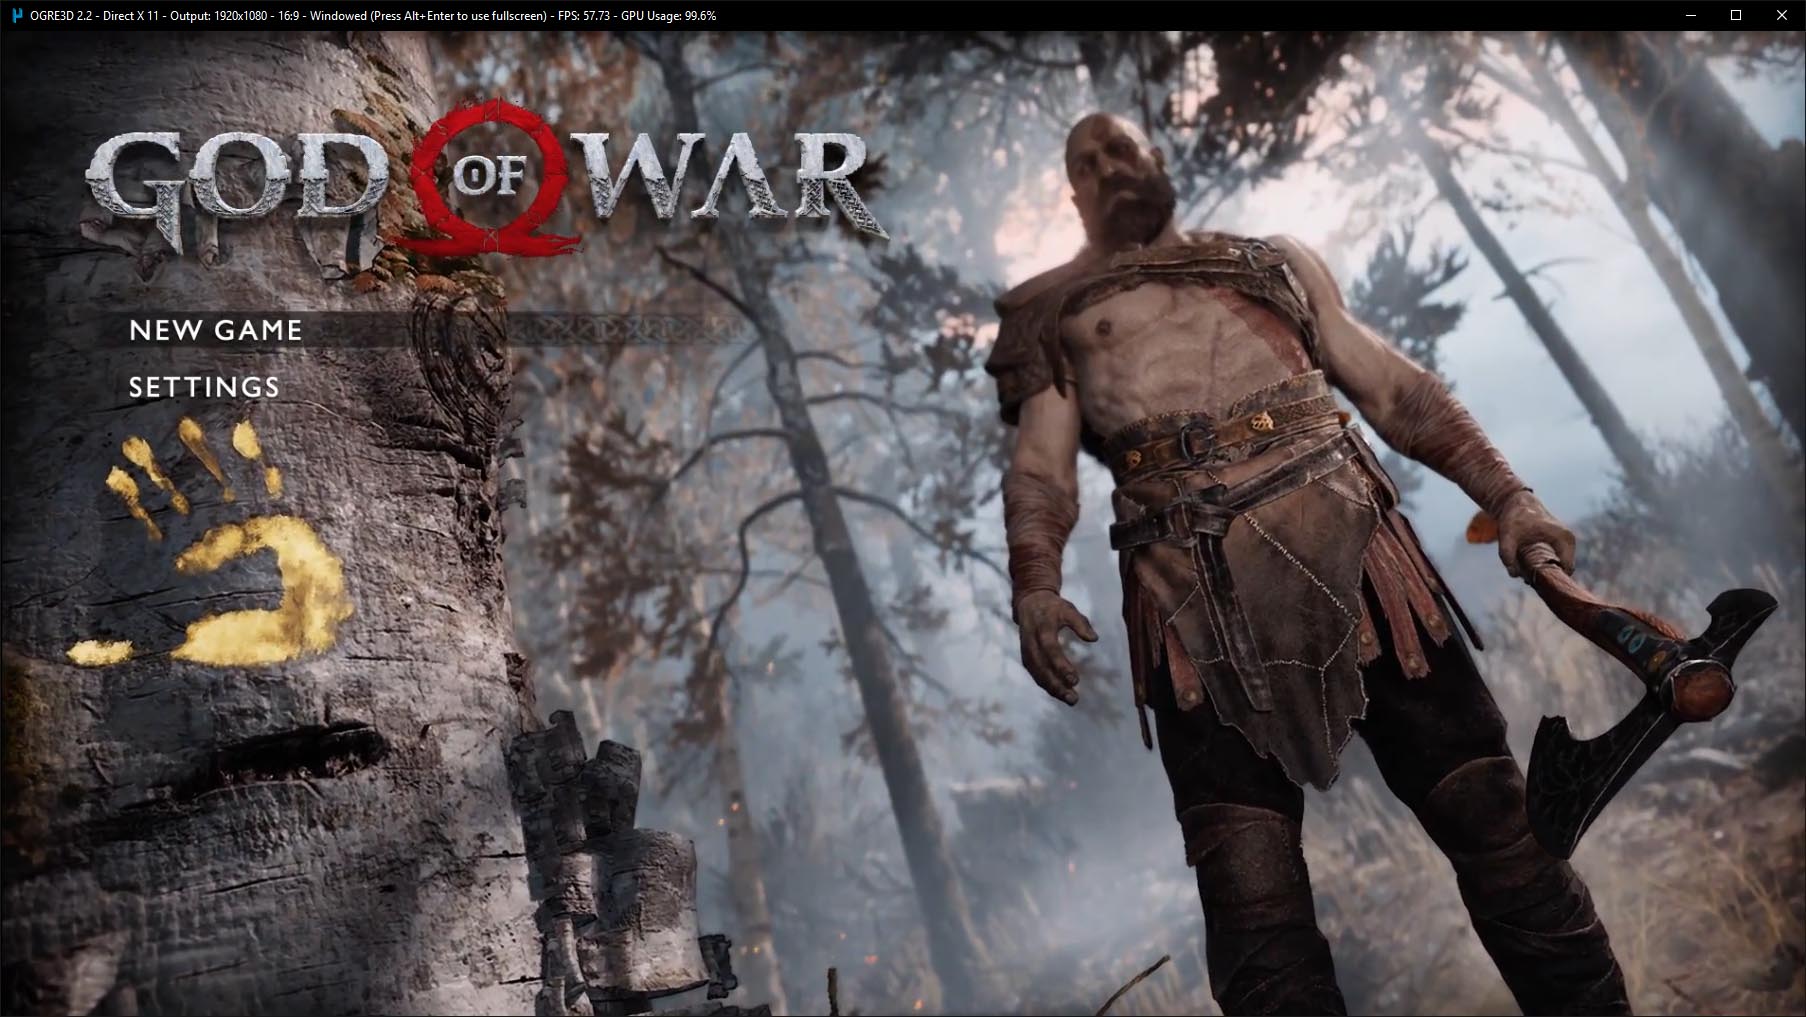 god of war 3 ppsspp android free download